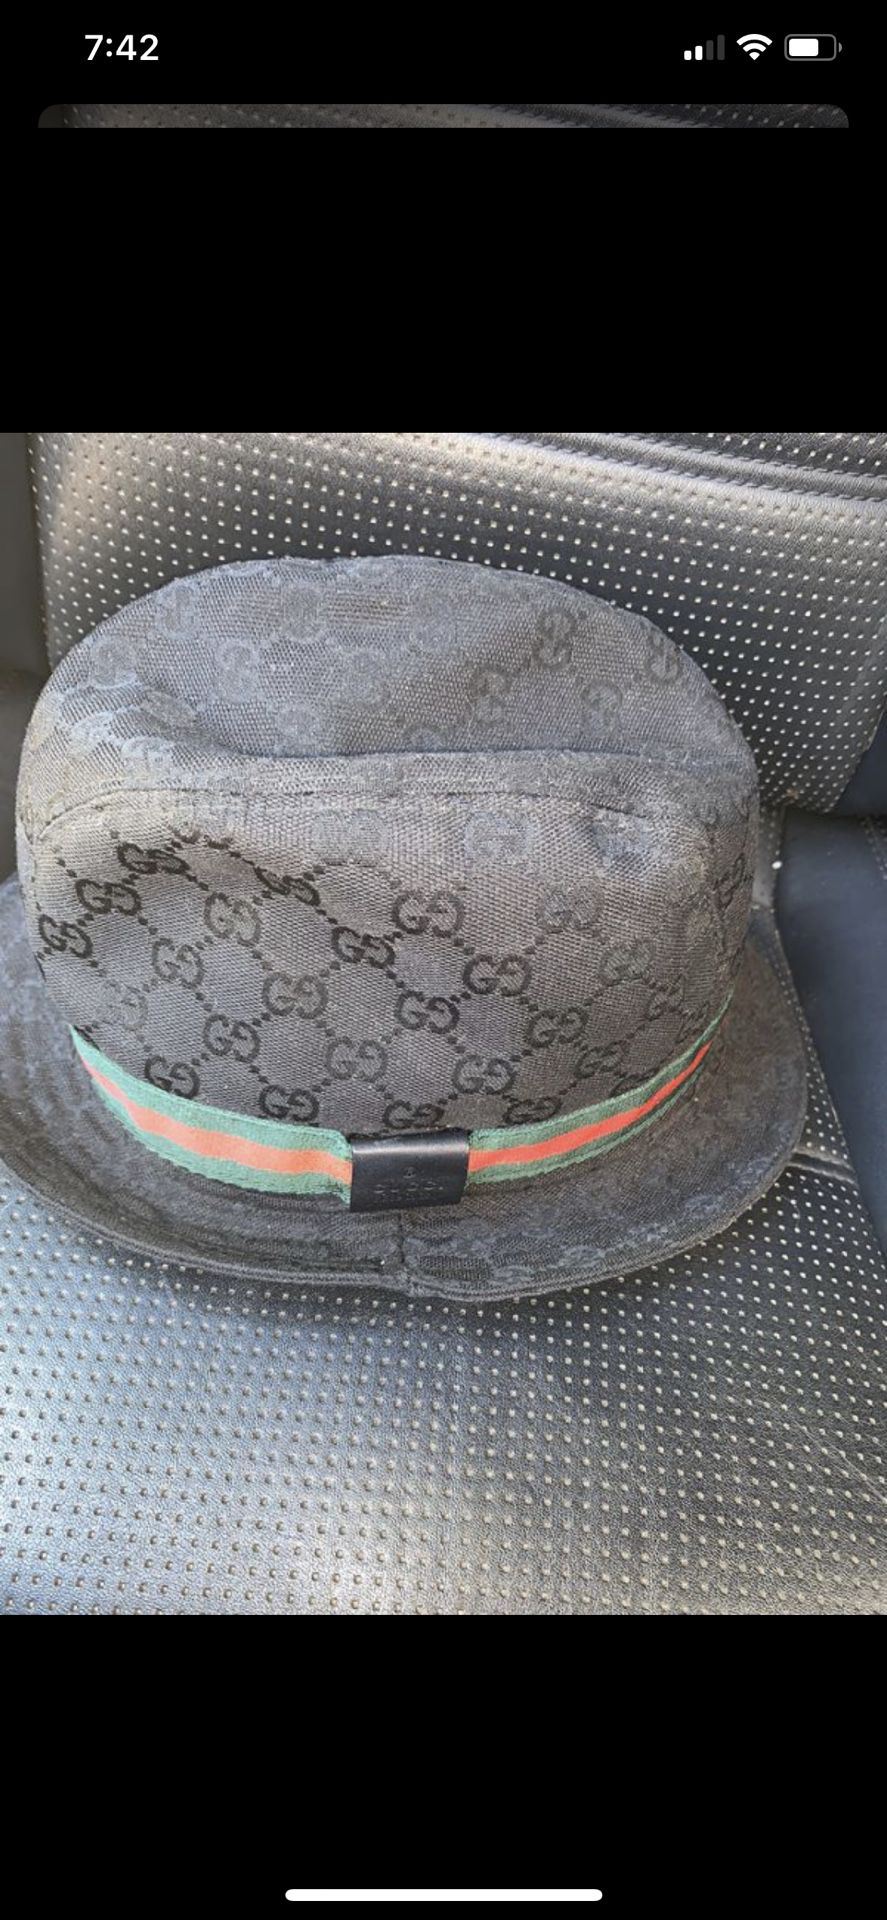 Authentic Gucci bucket hat